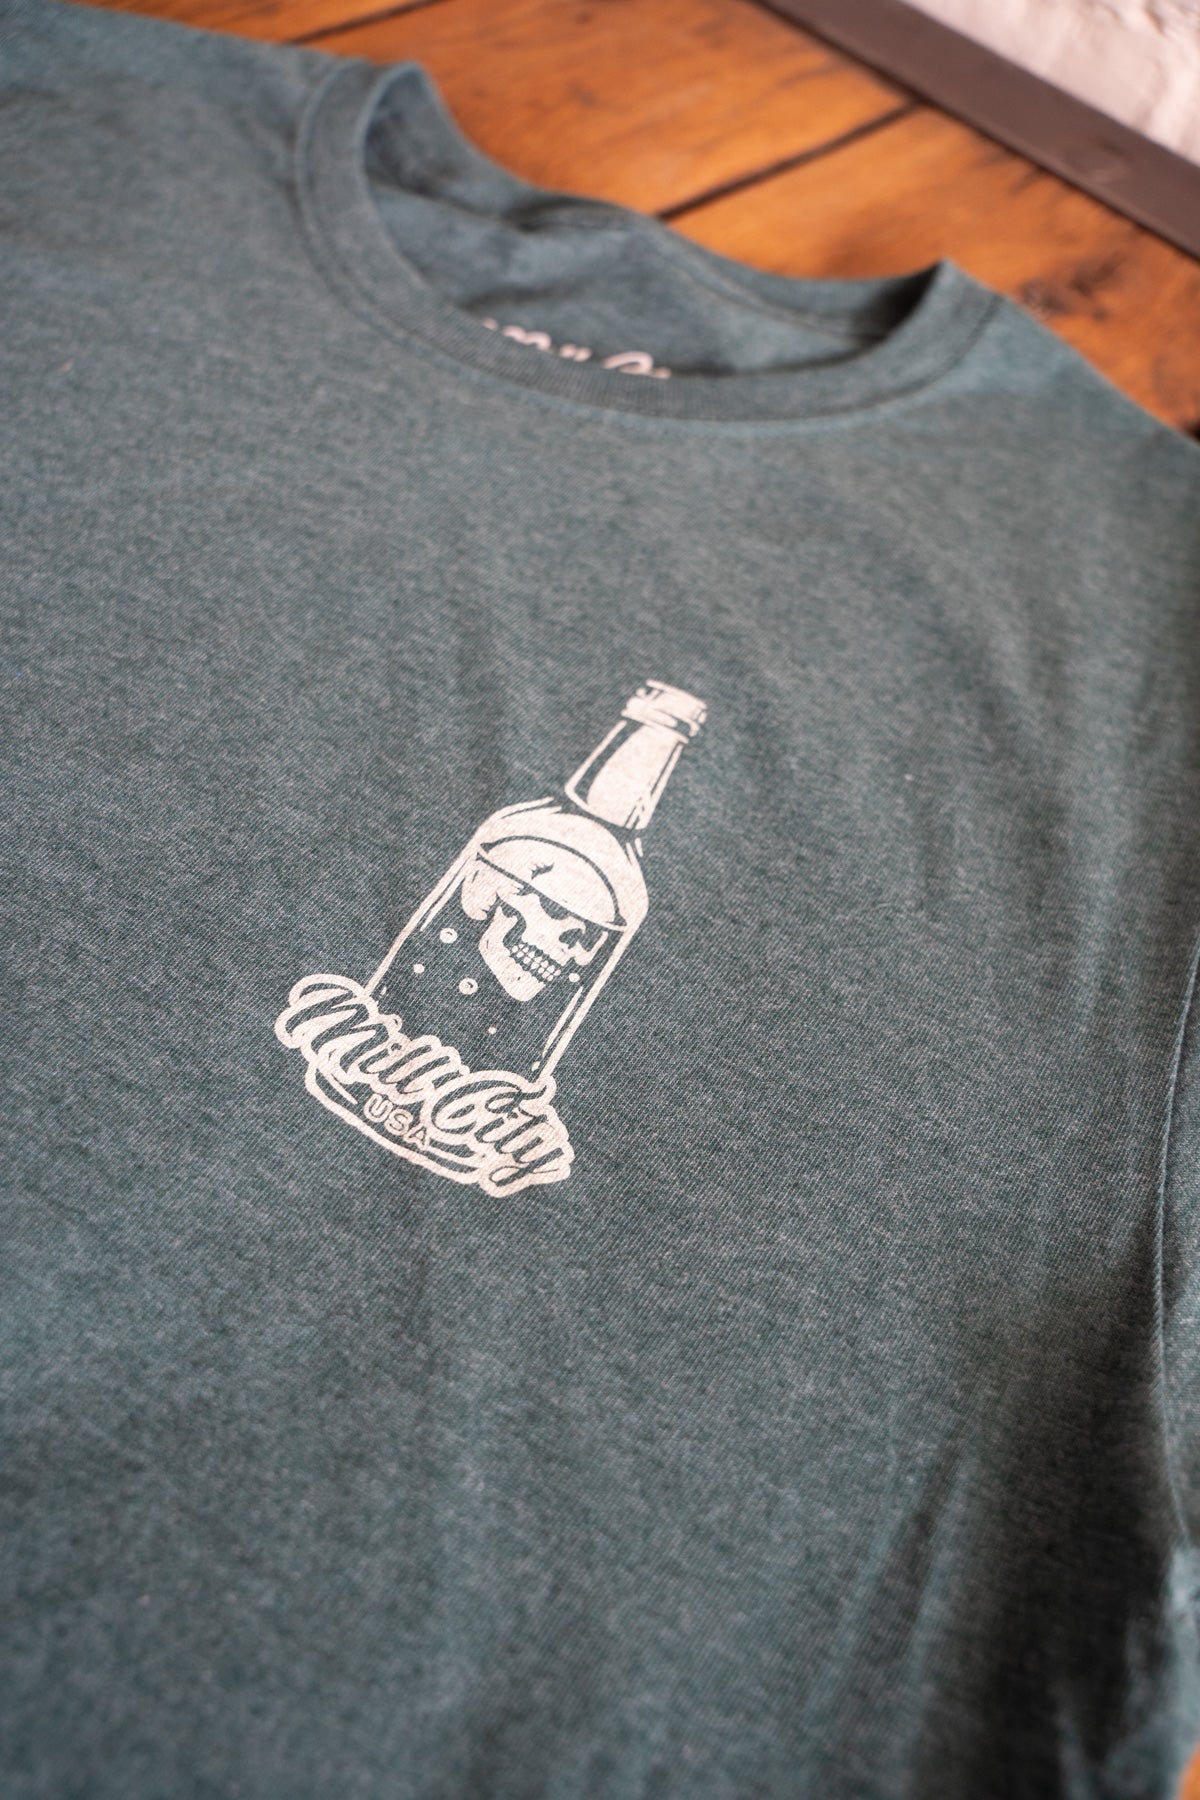 Drink Till It Doesn't Stink Tee